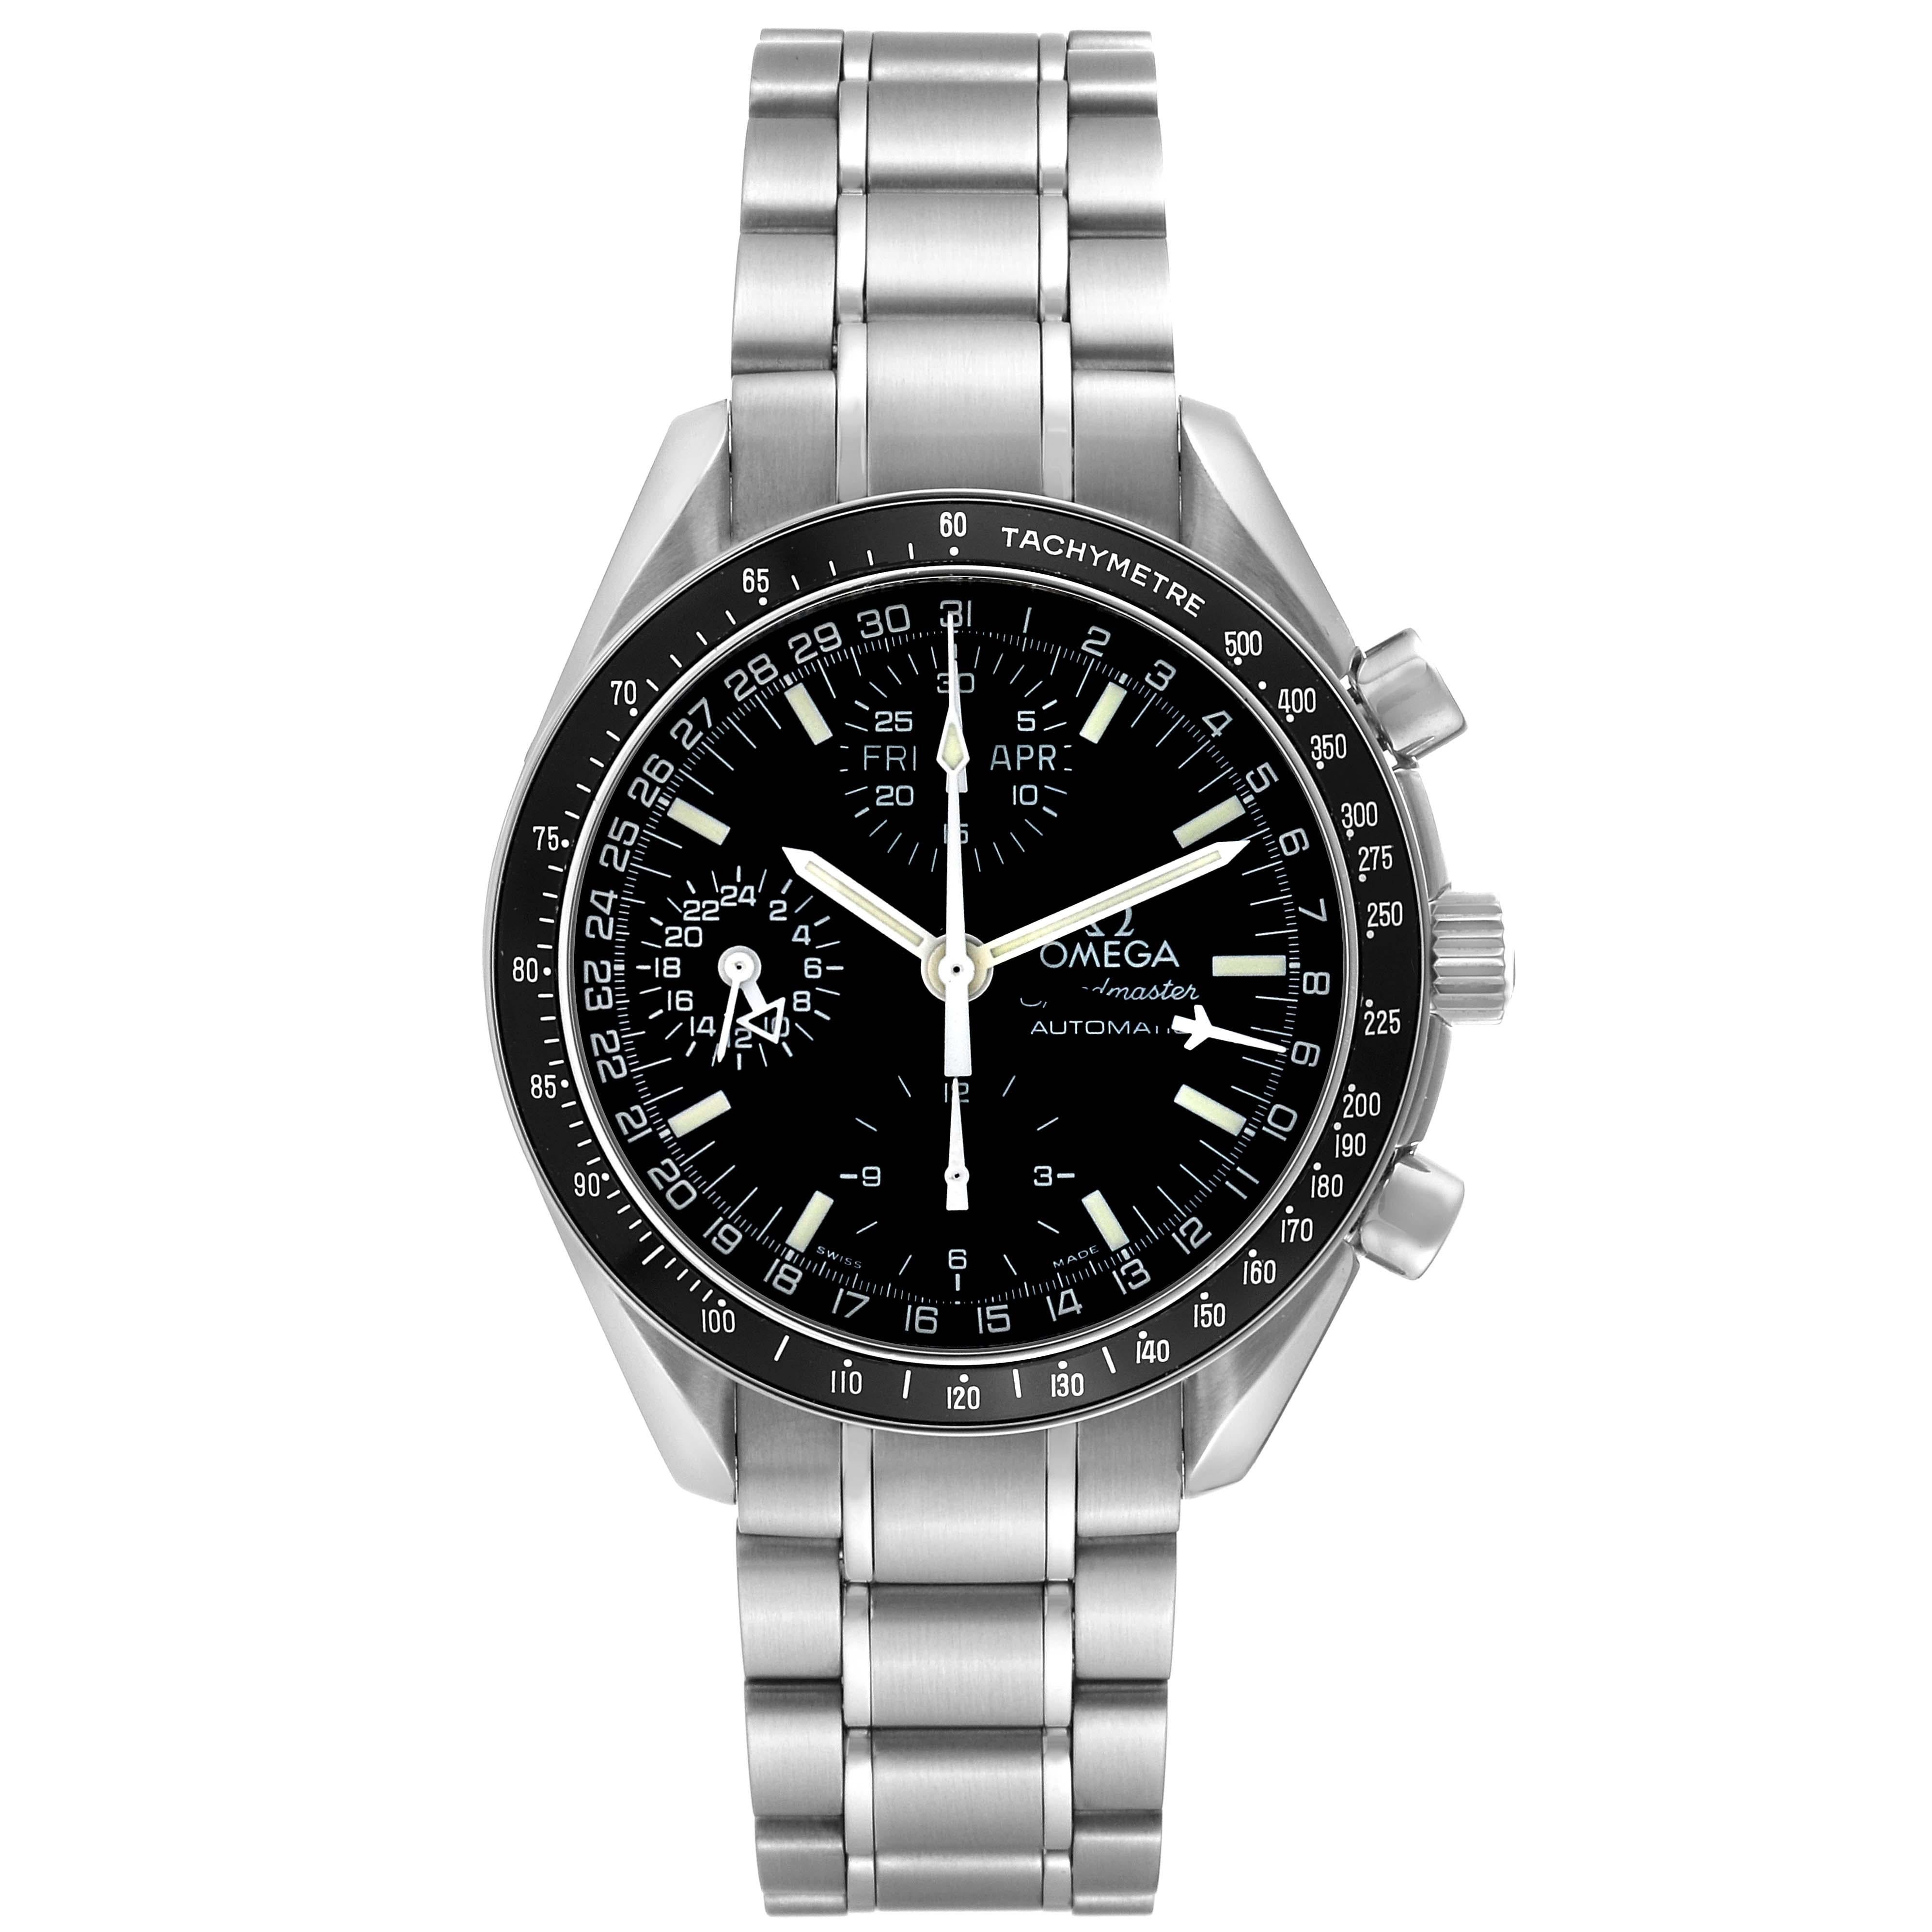 Omega Speedmaster Day Date Black Dial Automatic Mens Watch 3520.50.00 Card. Automatic self-winding movement. Stainless steel round case 39.0 mm in diameter. Stainless steel bezel with black tachymeter insert. Anti-reflective scratch resistant